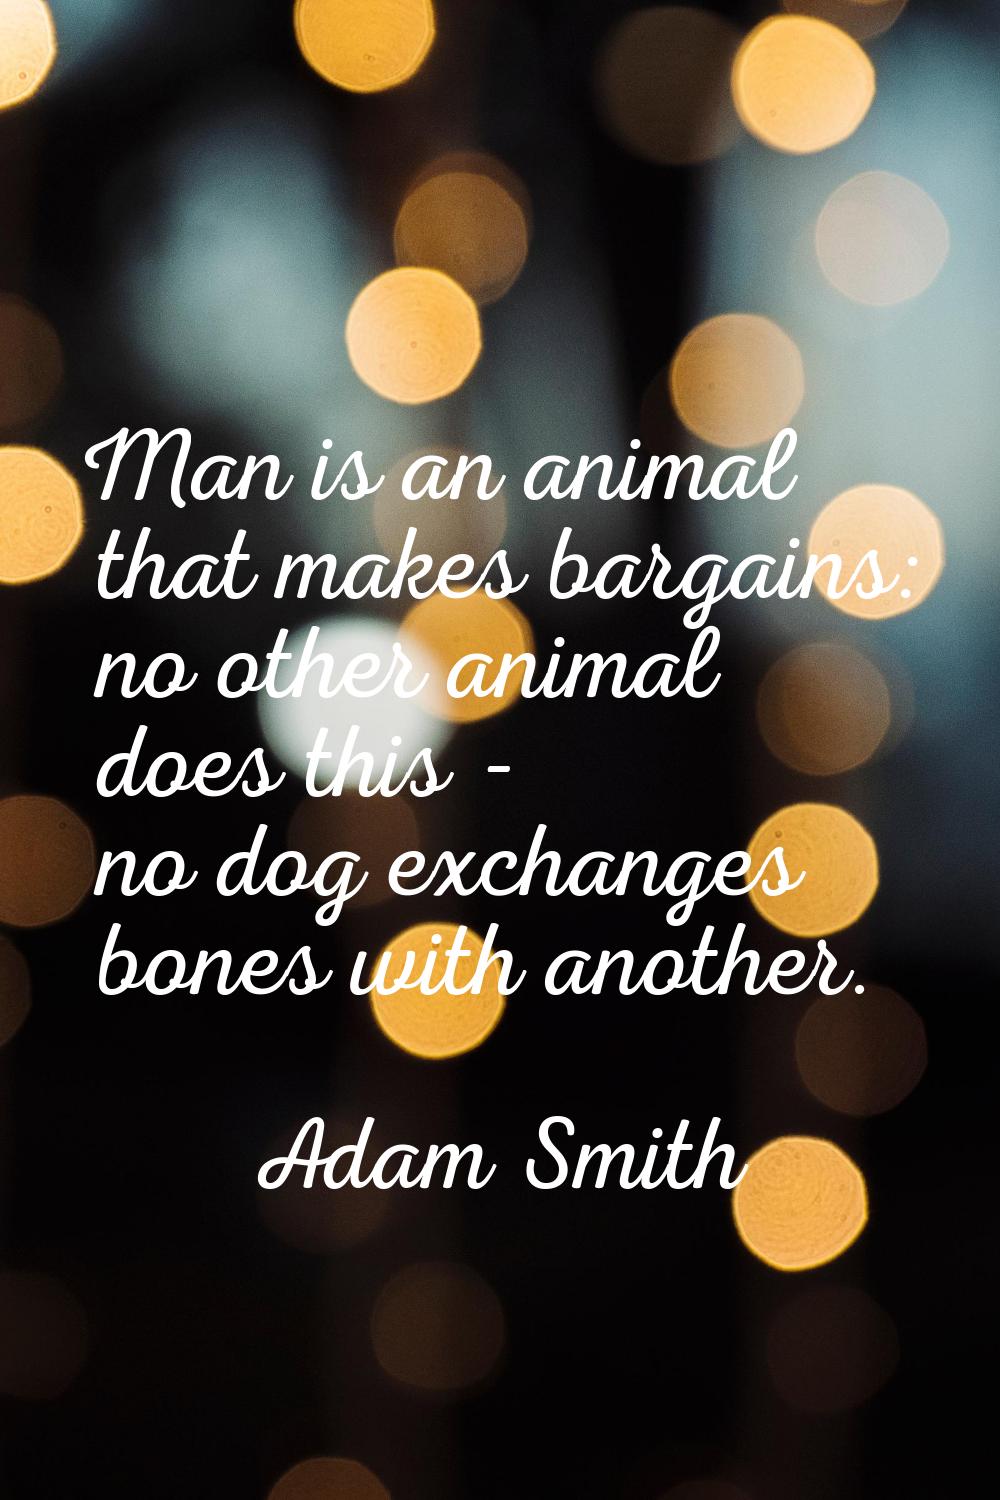 Man is an animal that makes bargains: no other animal does this - no dog exchanges bones with anoth